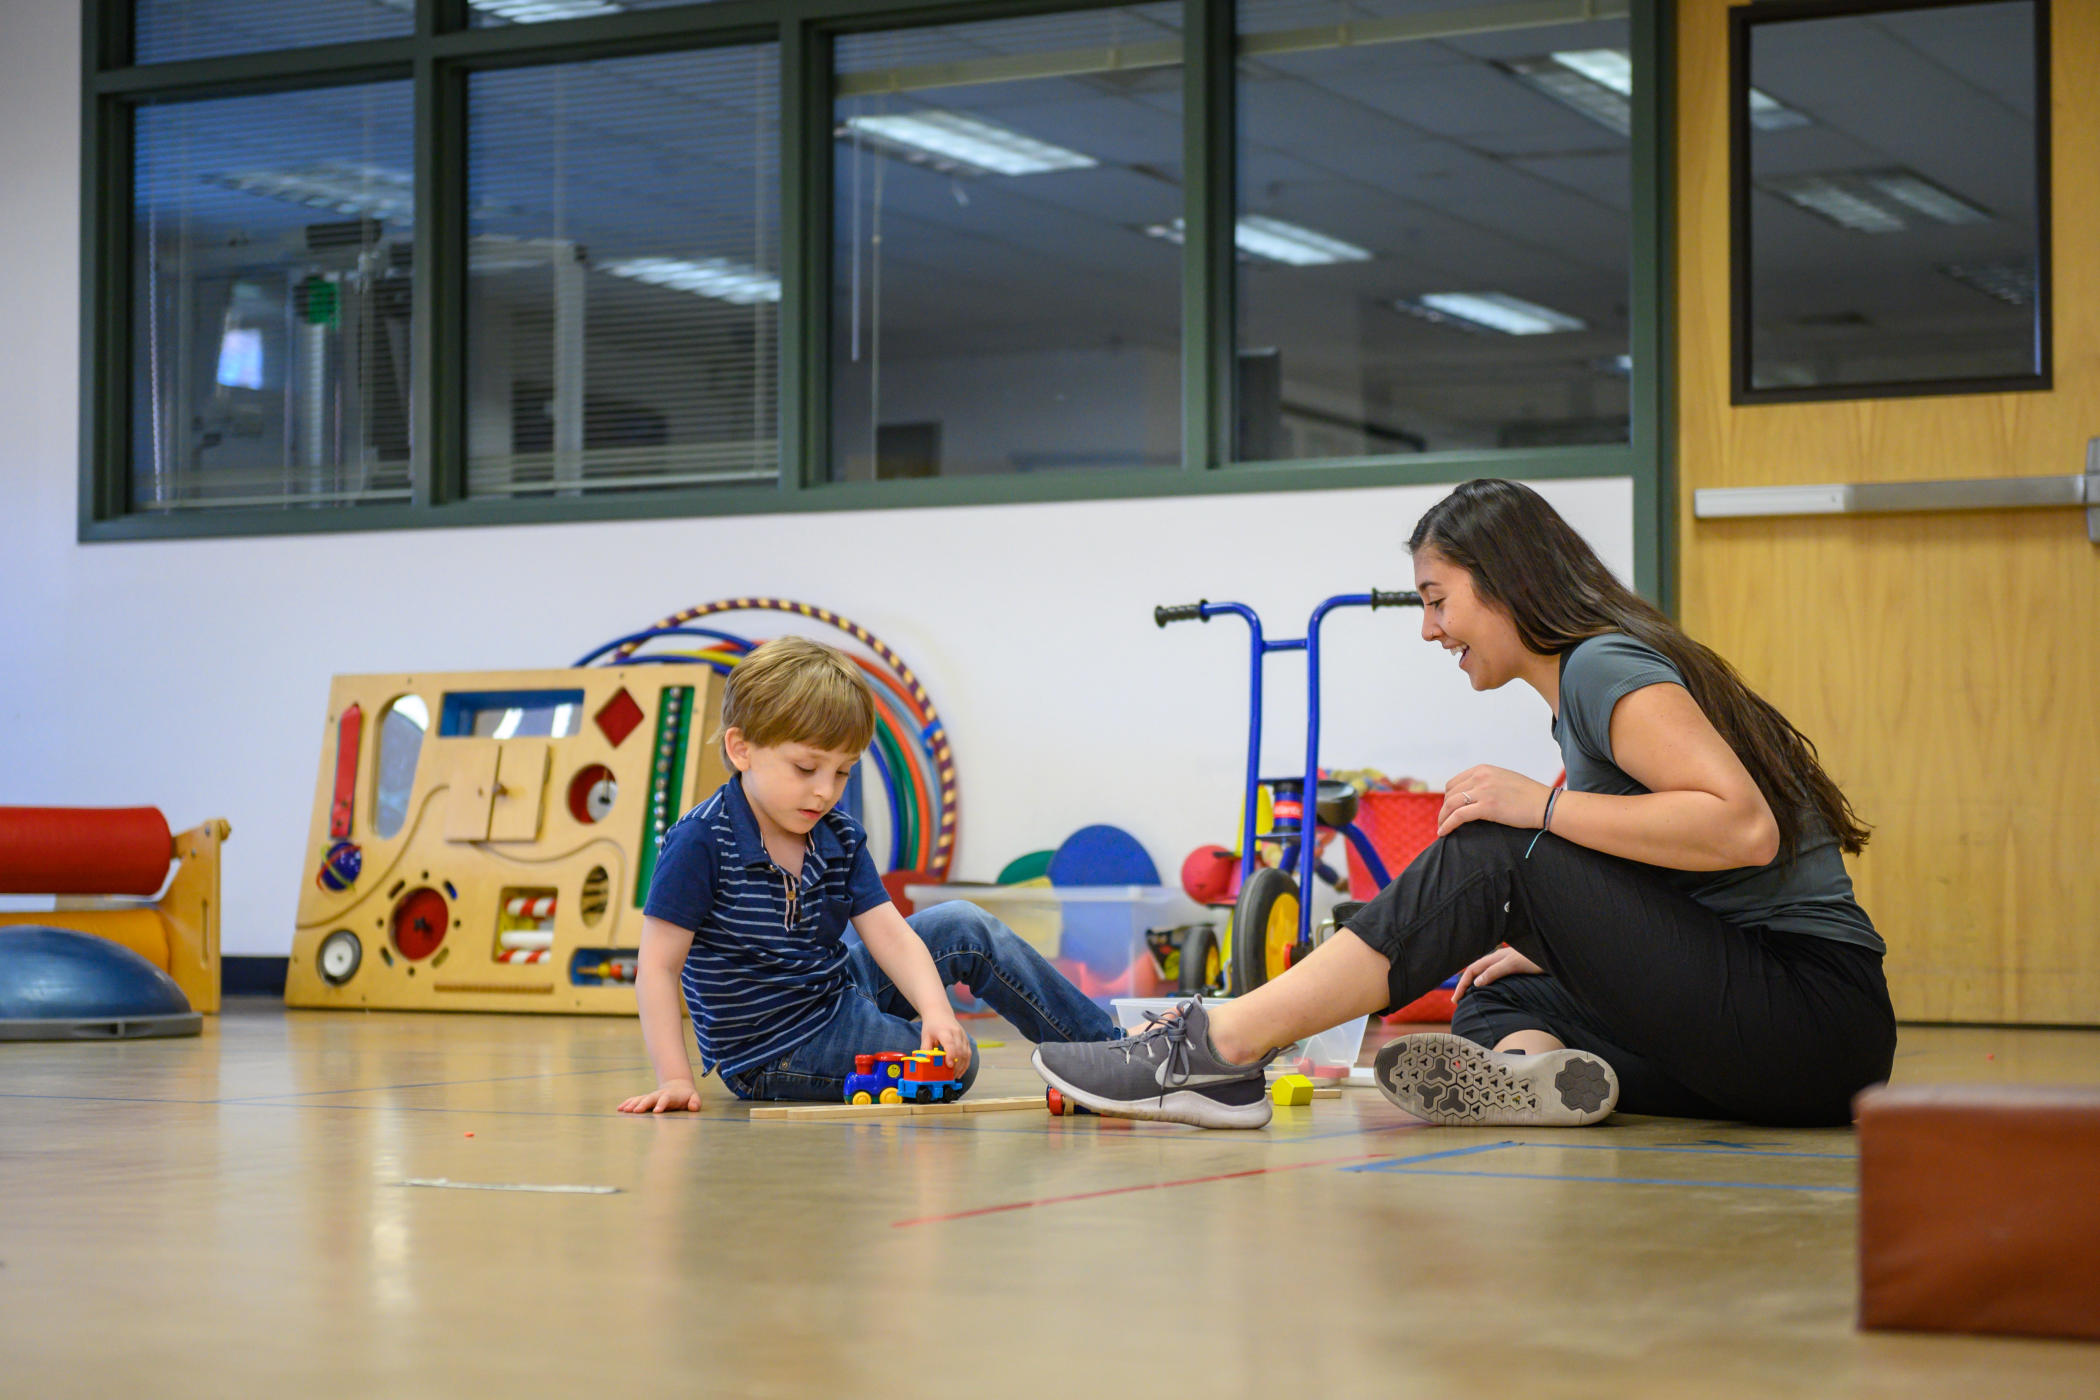 Student sits on the floor with 5-year-old boy as they play with trains during a session in the Autism Clinic in March 2020. Other toys and play equipment, like hula hoops, can be seen in the background.